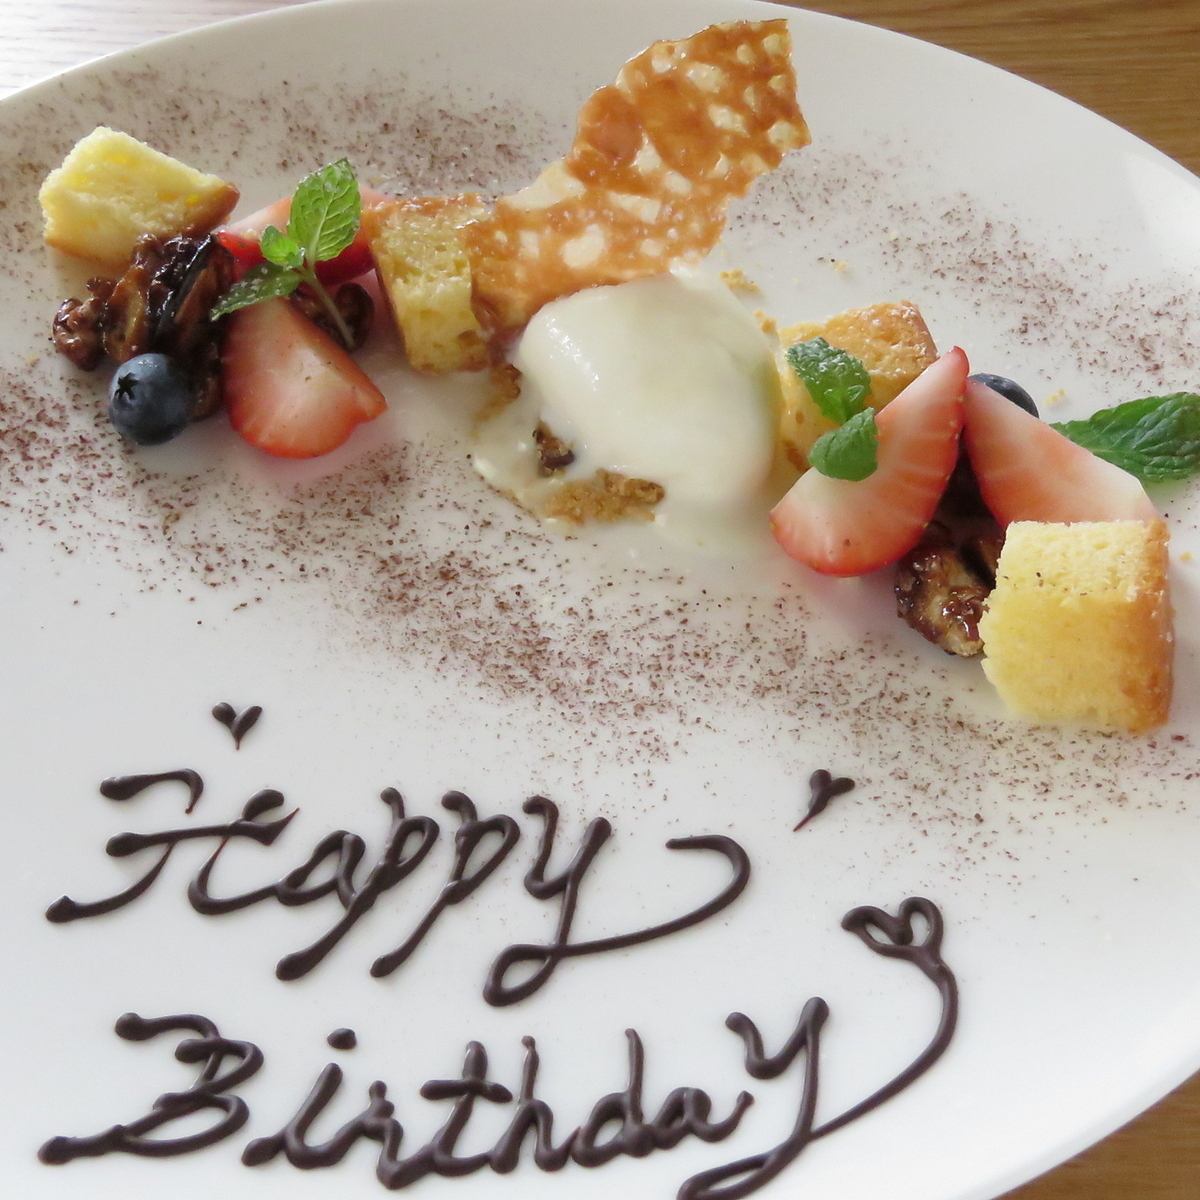 Make your birthday special with a birthday plate!